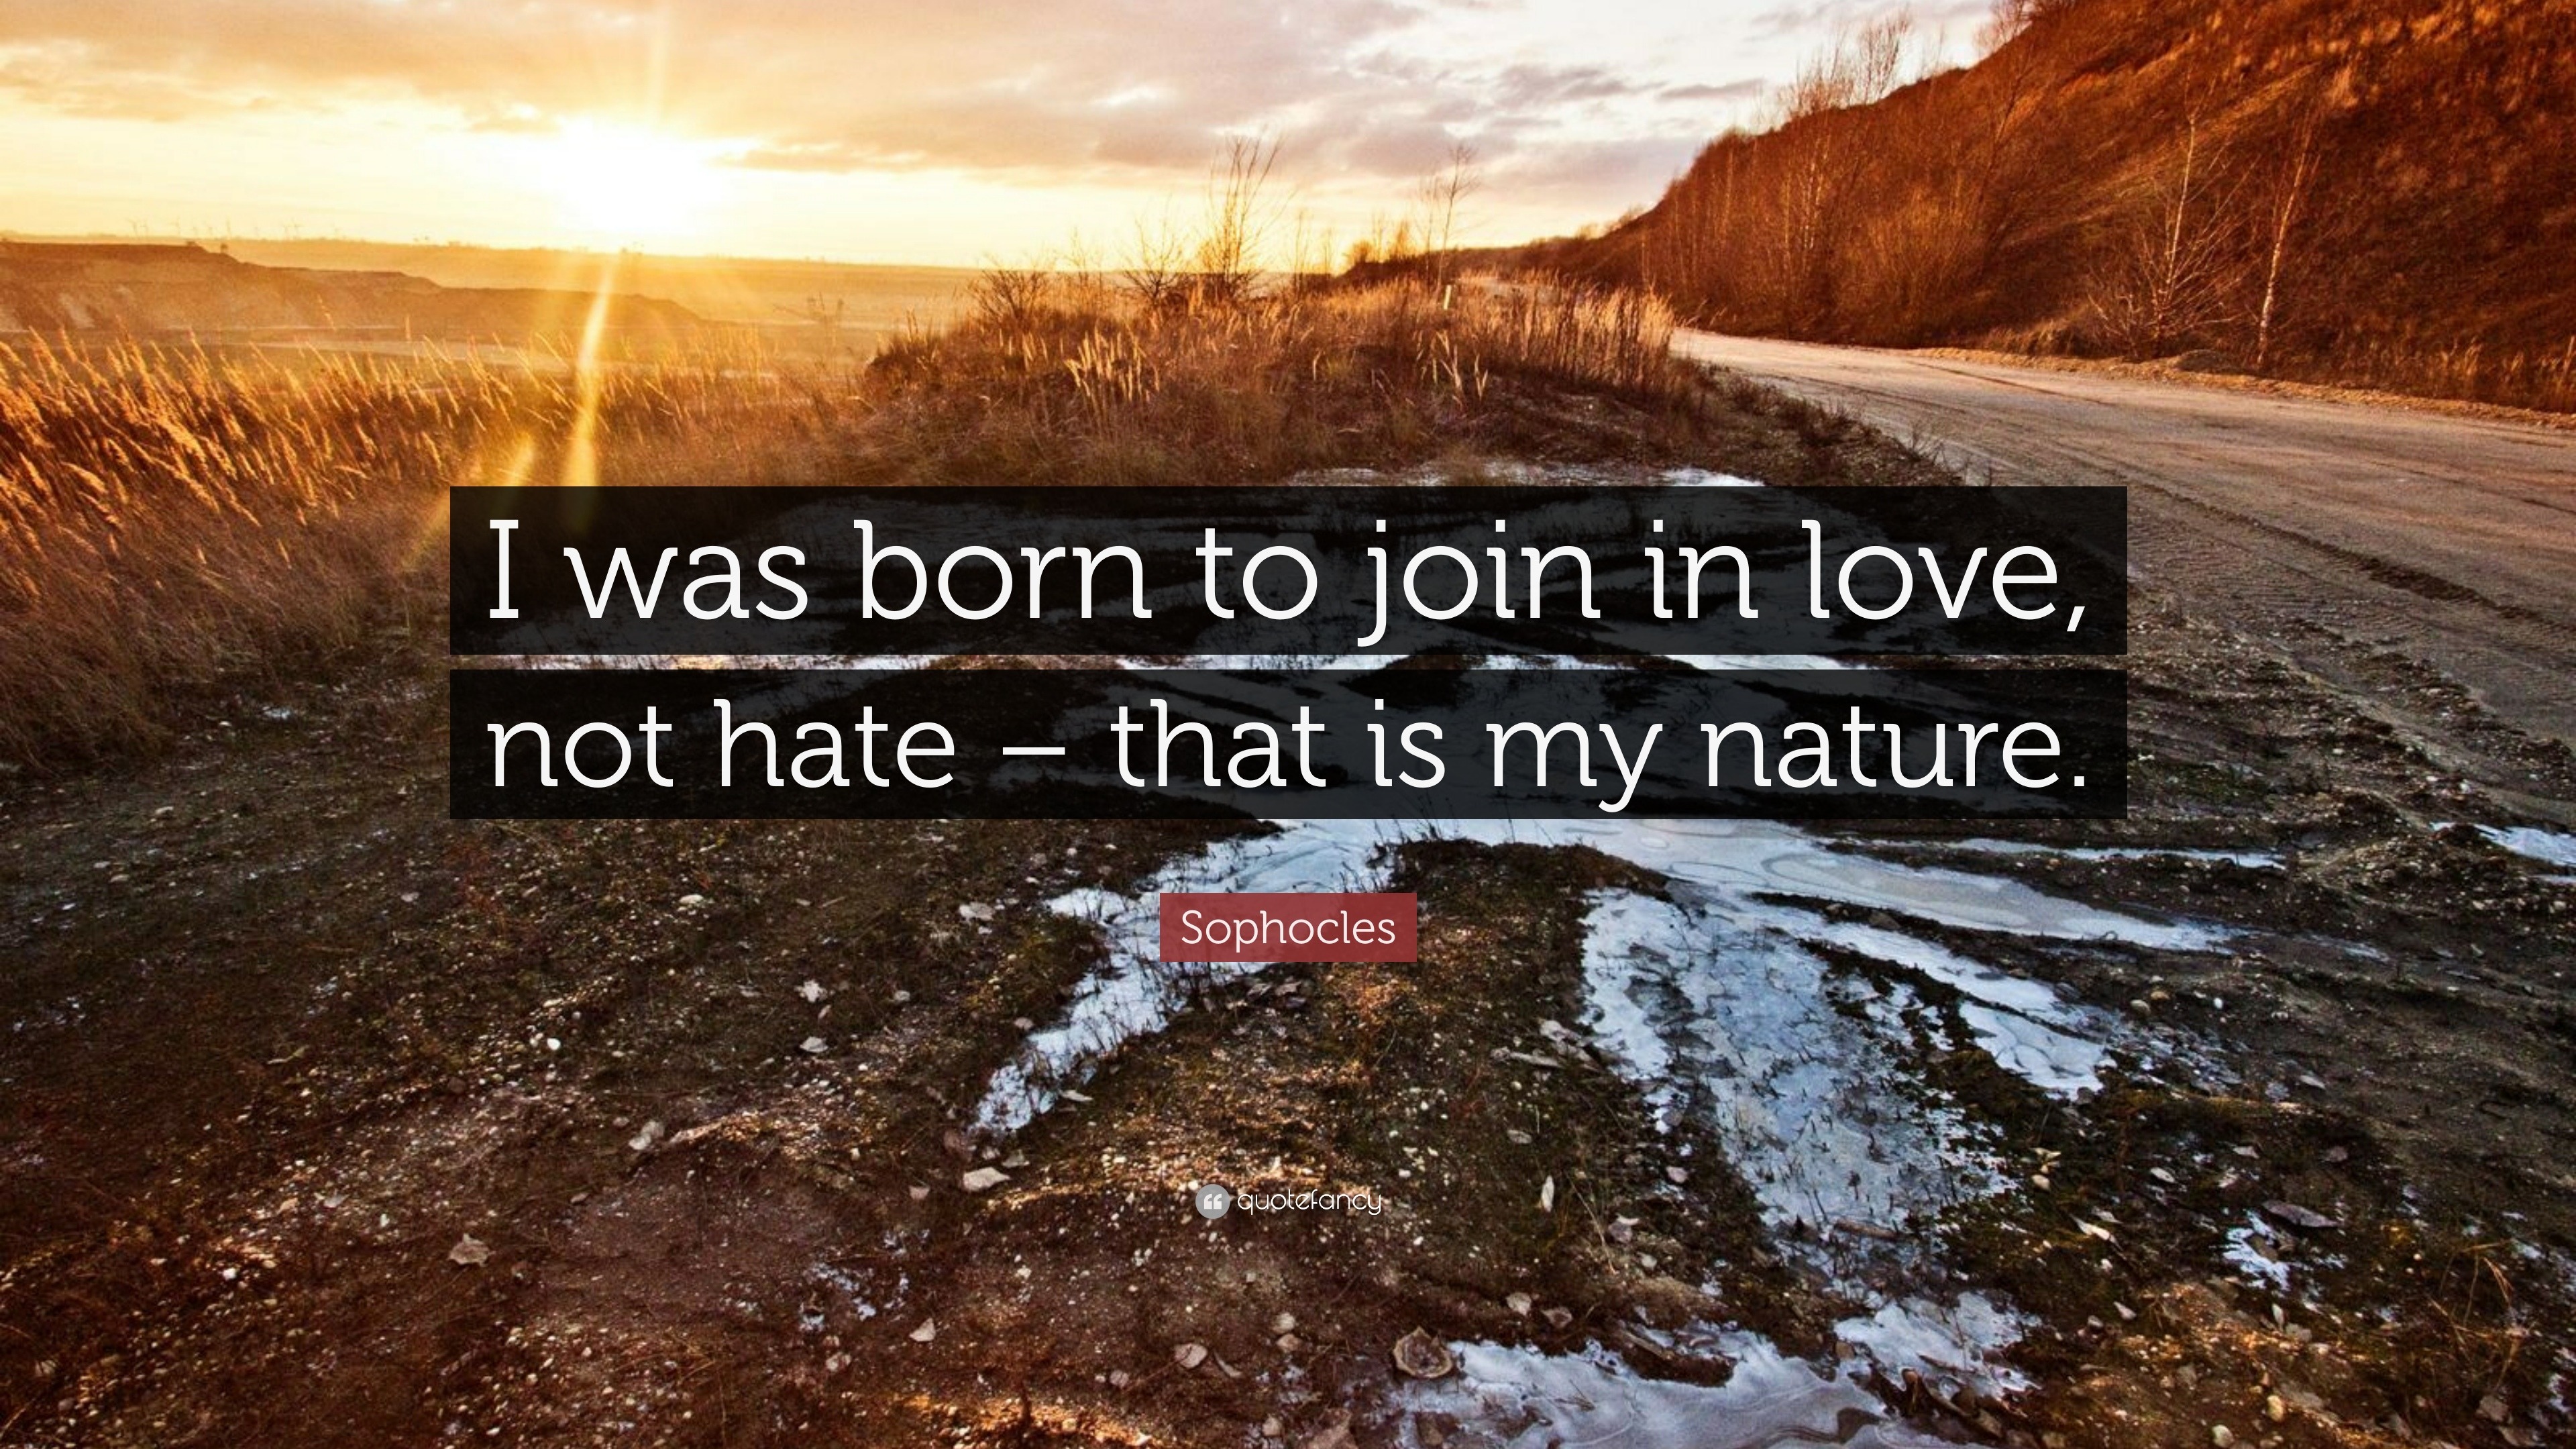 Sophocles Quote “I was born to join in love not hate – that